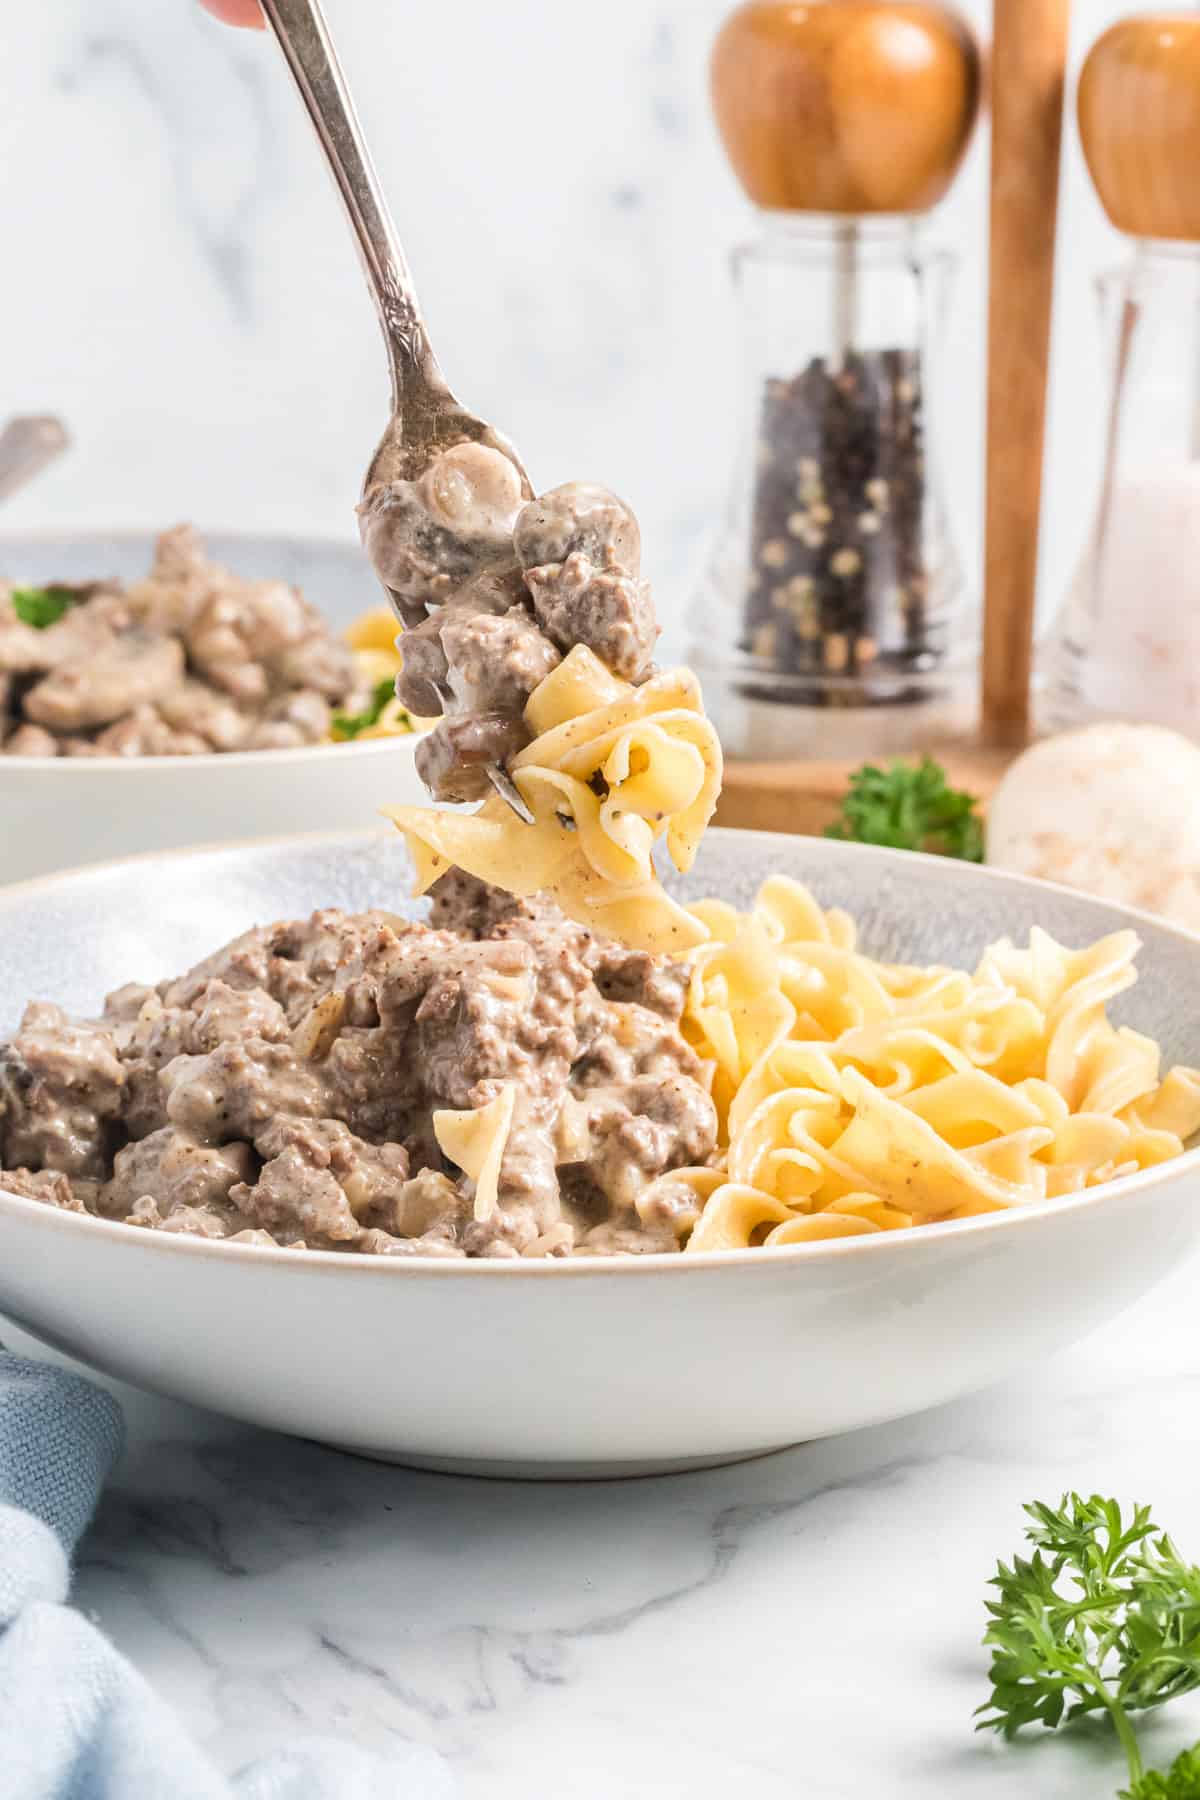 A fork lifting a bite of egg noodles with ground beef stroganoff.